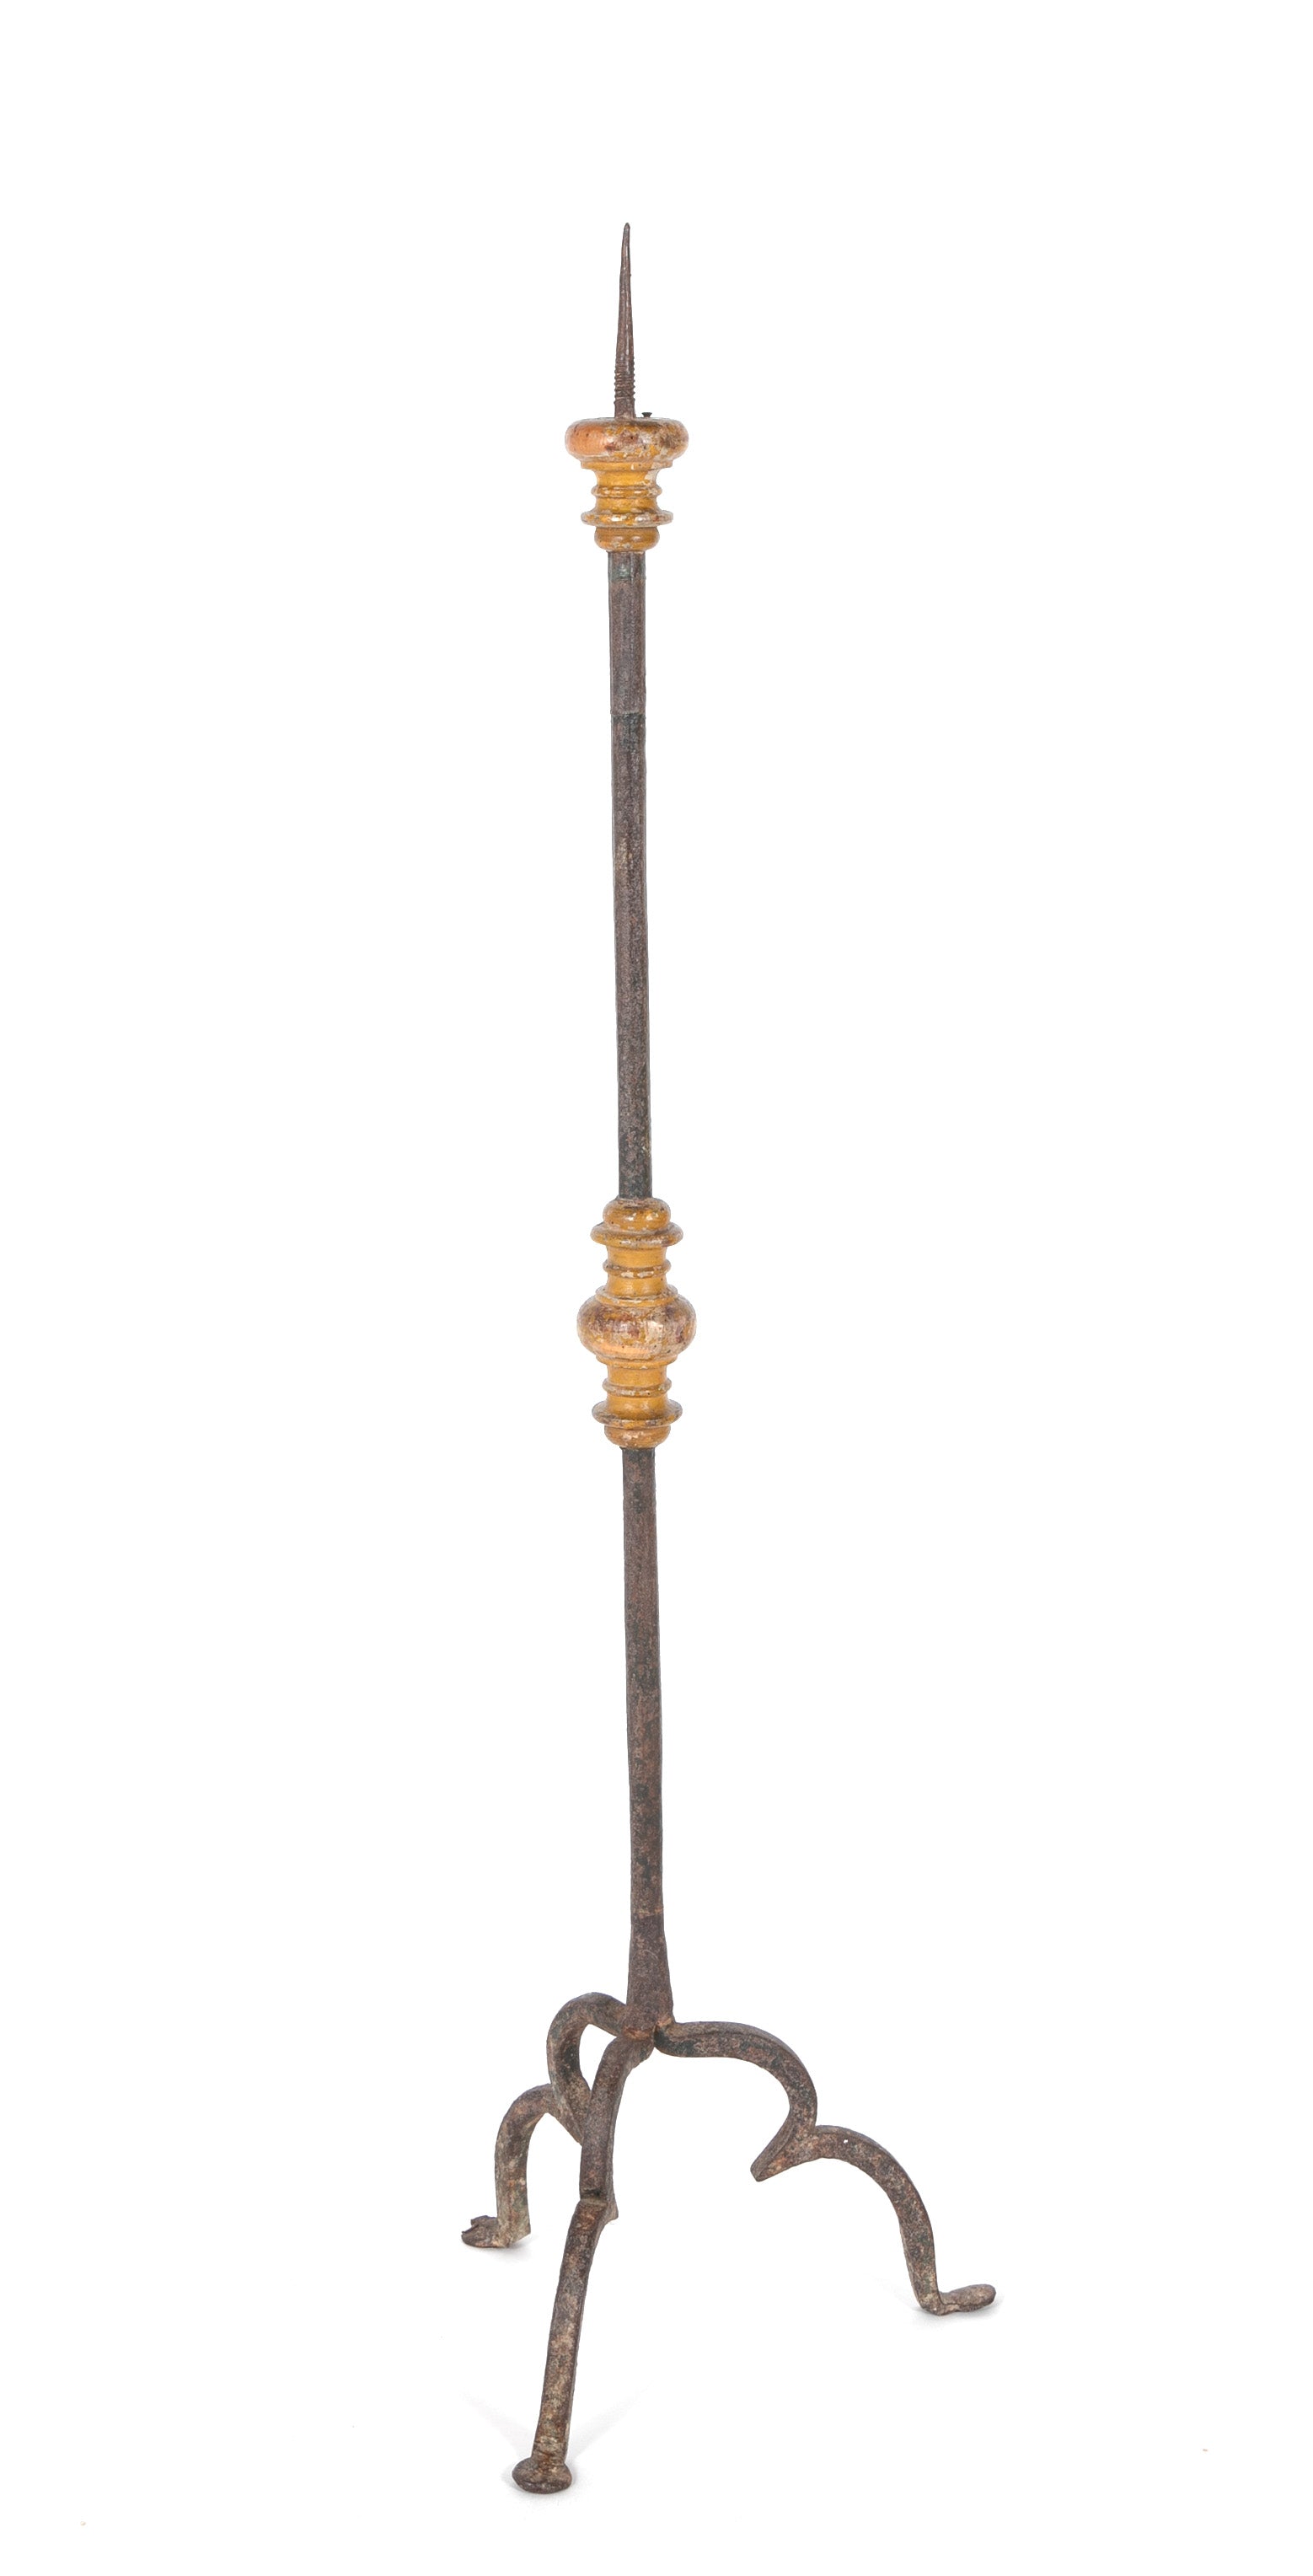 Wrought Iron Pricket Candlestick